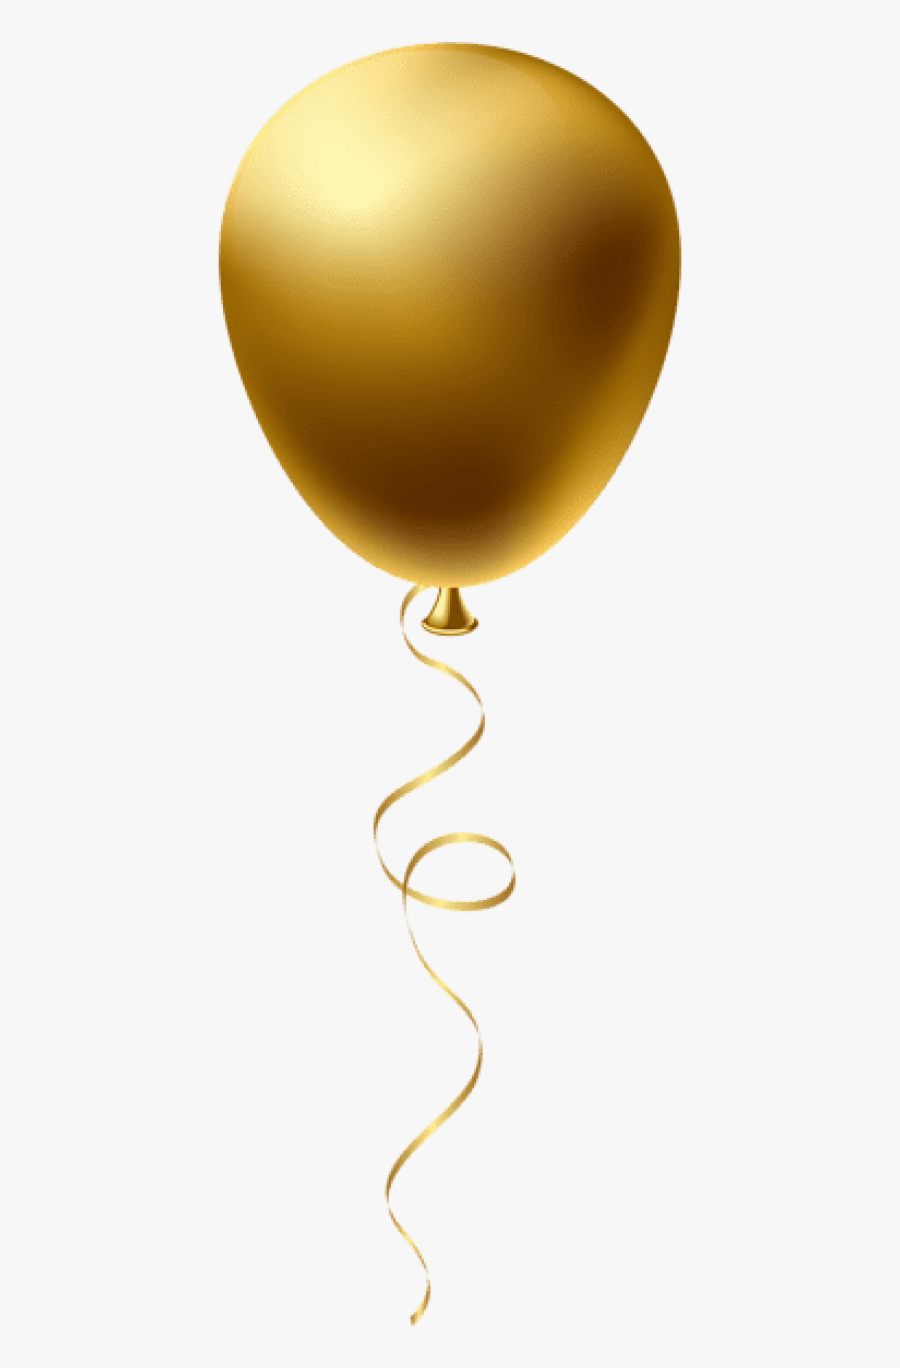 Gold Balloons Png - Transparent Gold Balloons Png , Free Transparent